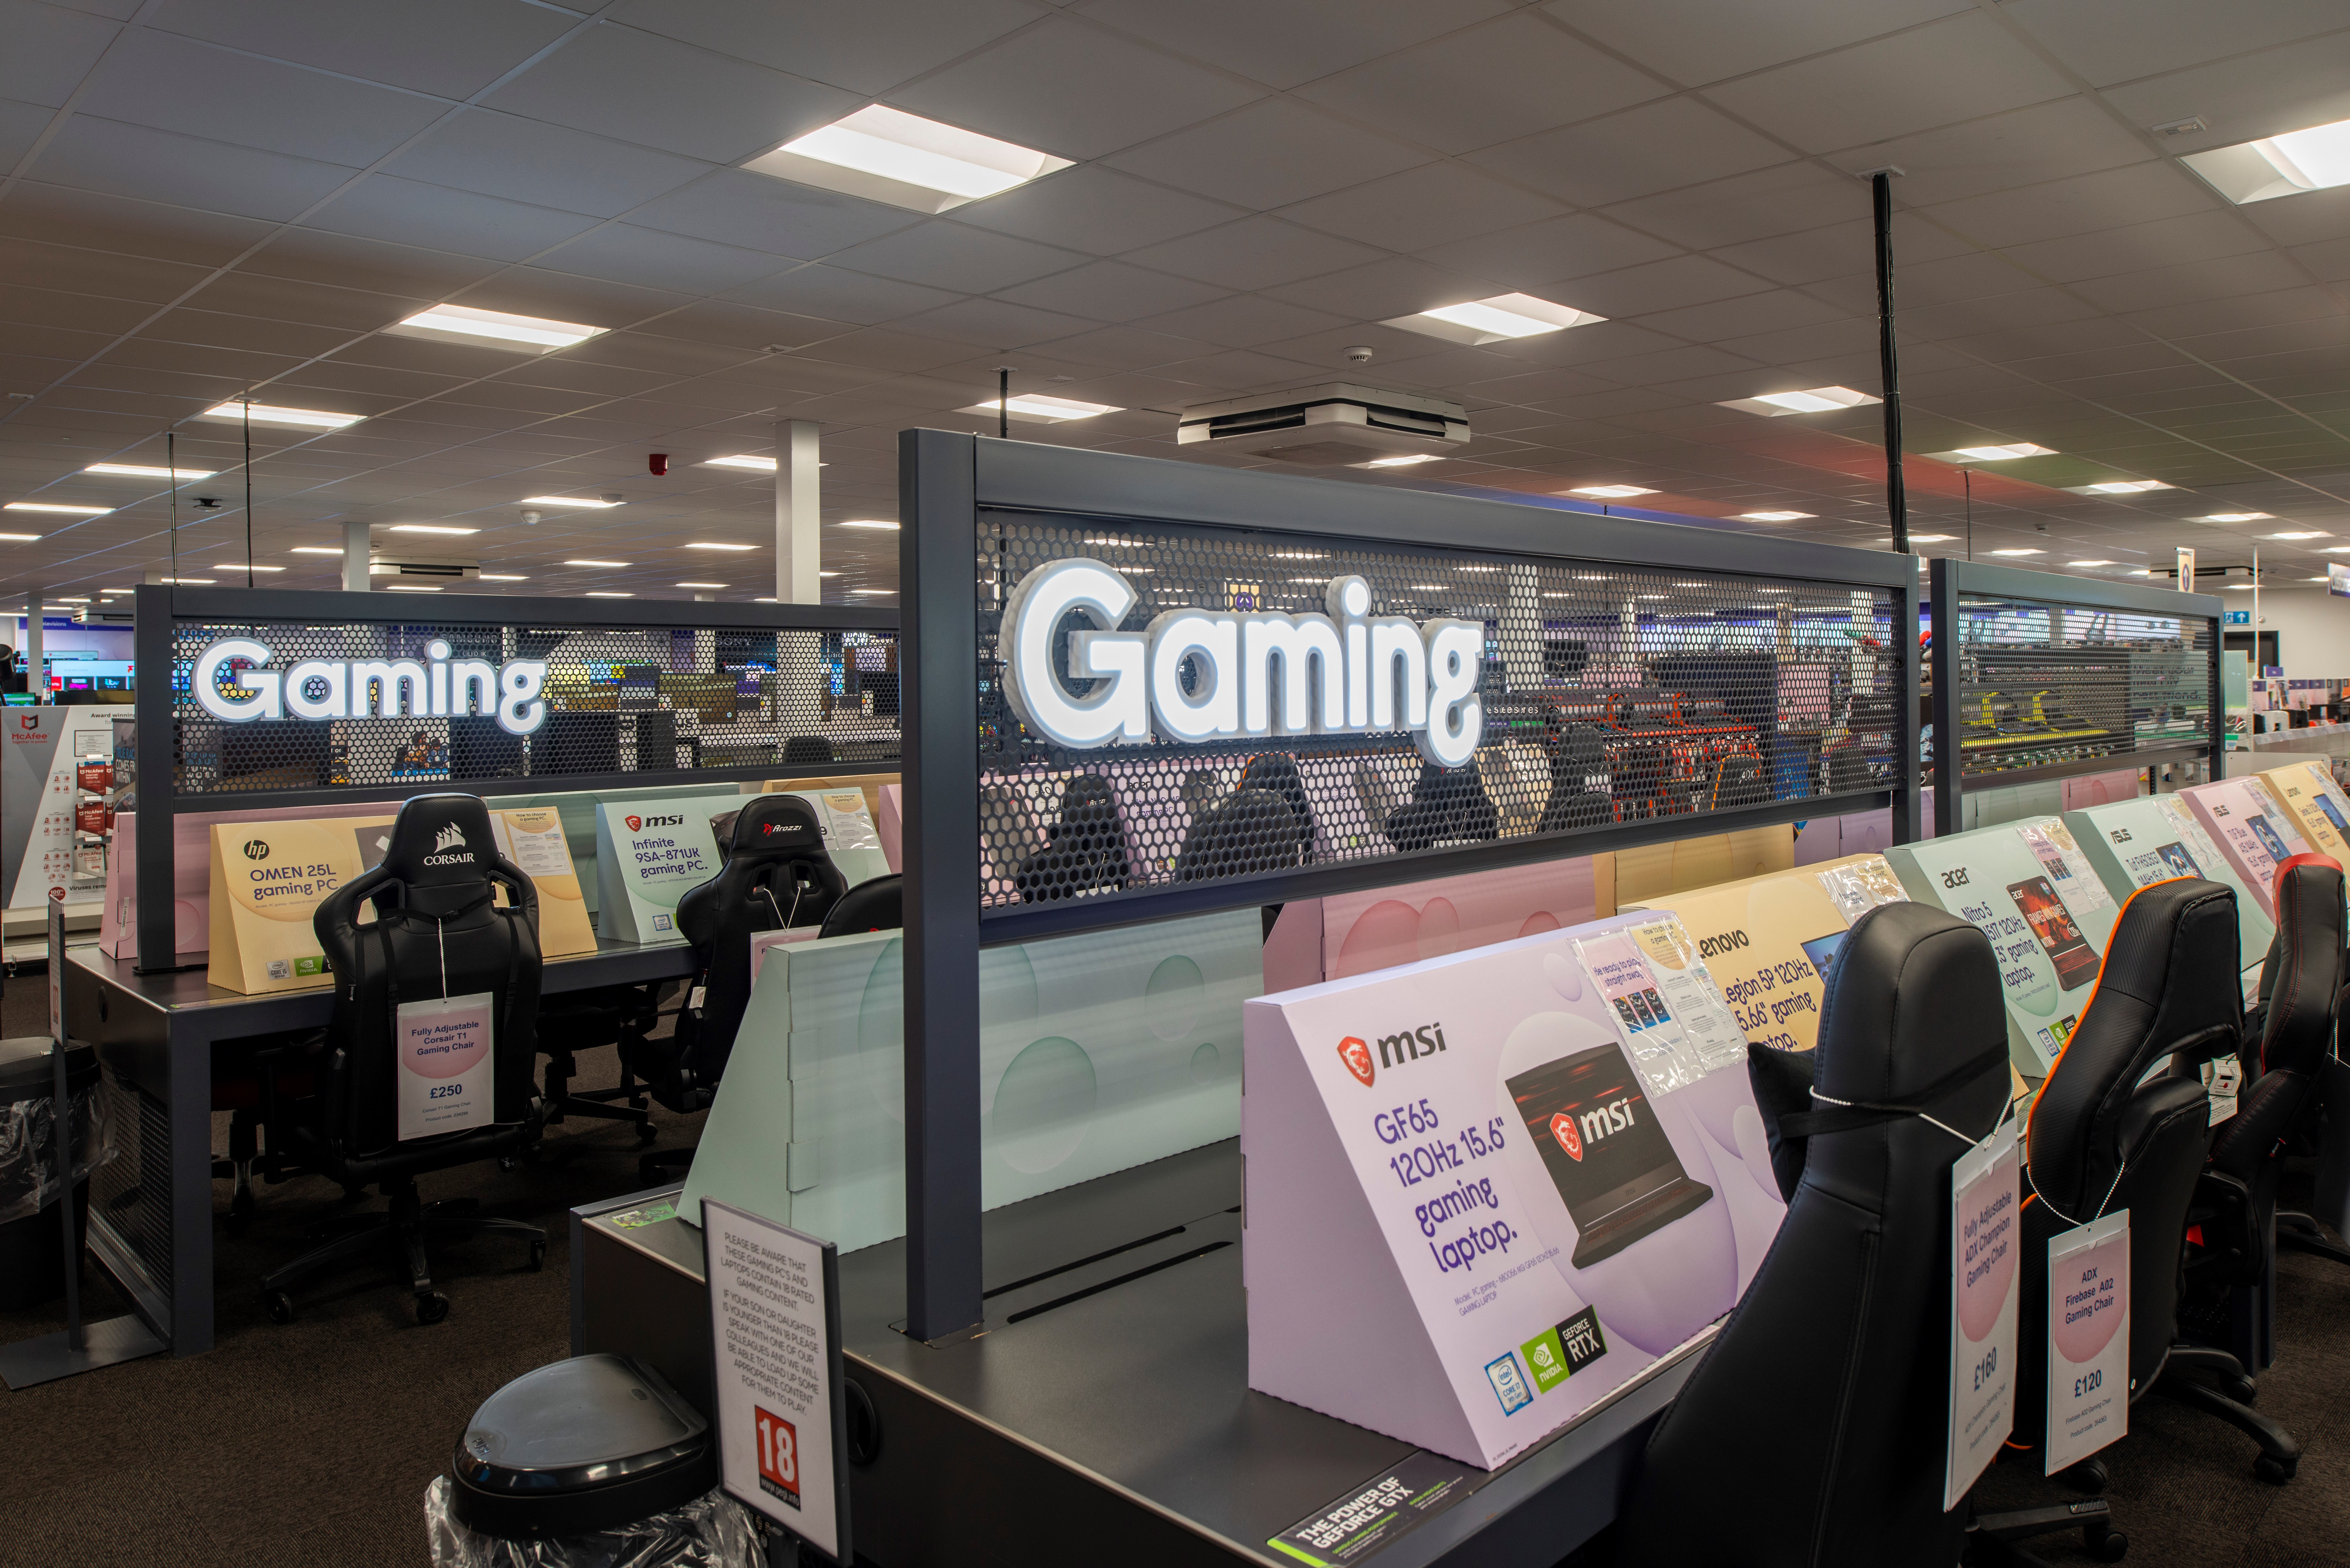 In-store Gaming stations